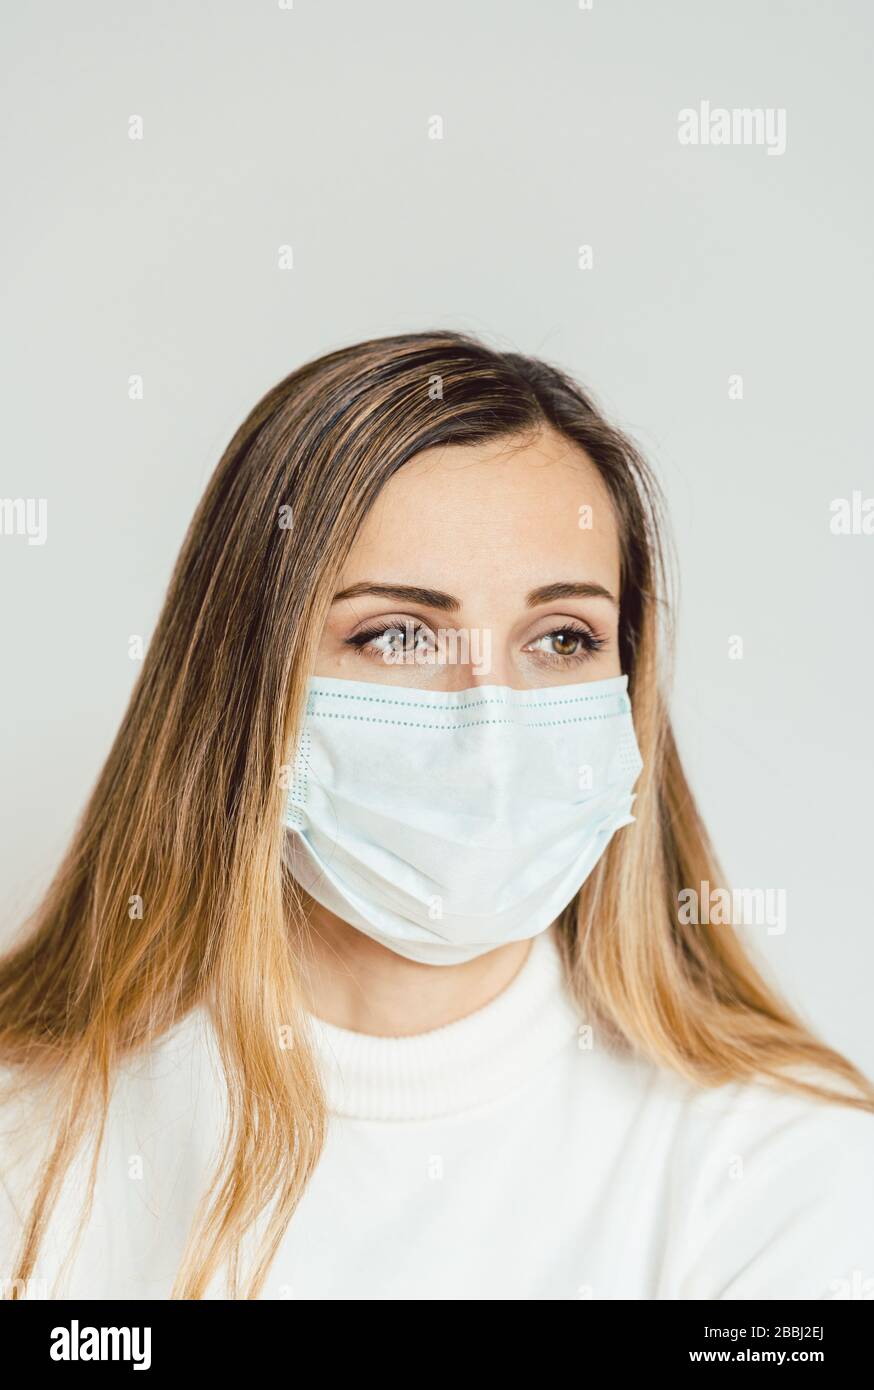 Anxious woman with face mask worried about the Covid-19 outbreak Stock Photo